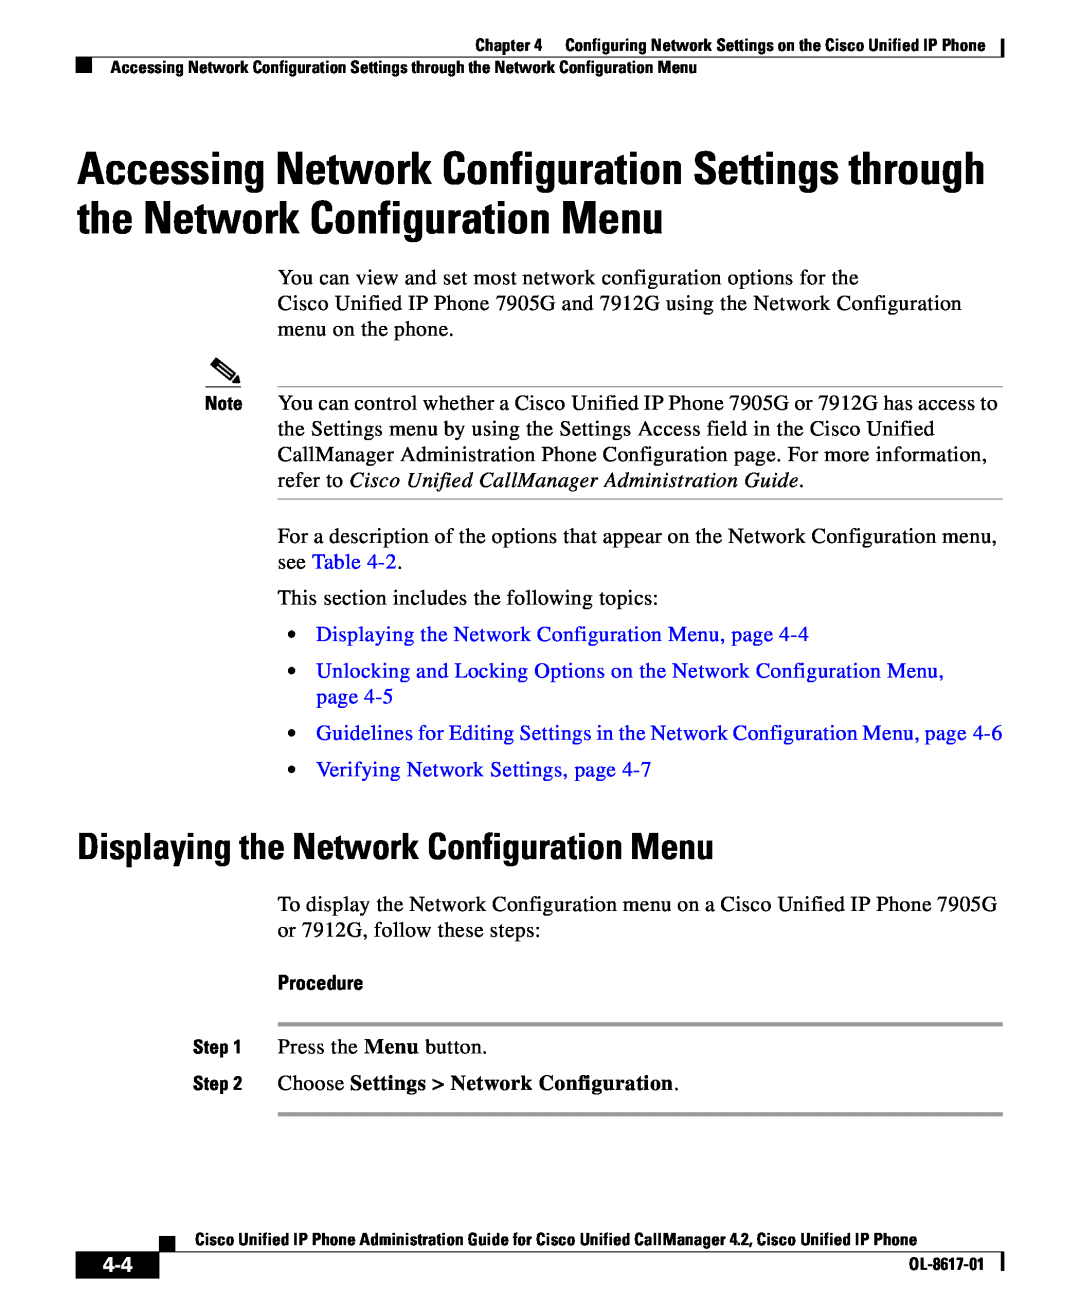 Cisco Systems 4.2 manual Displaying the Network Configuration Menu, page, Verifying Network Settings, page, Procedure 